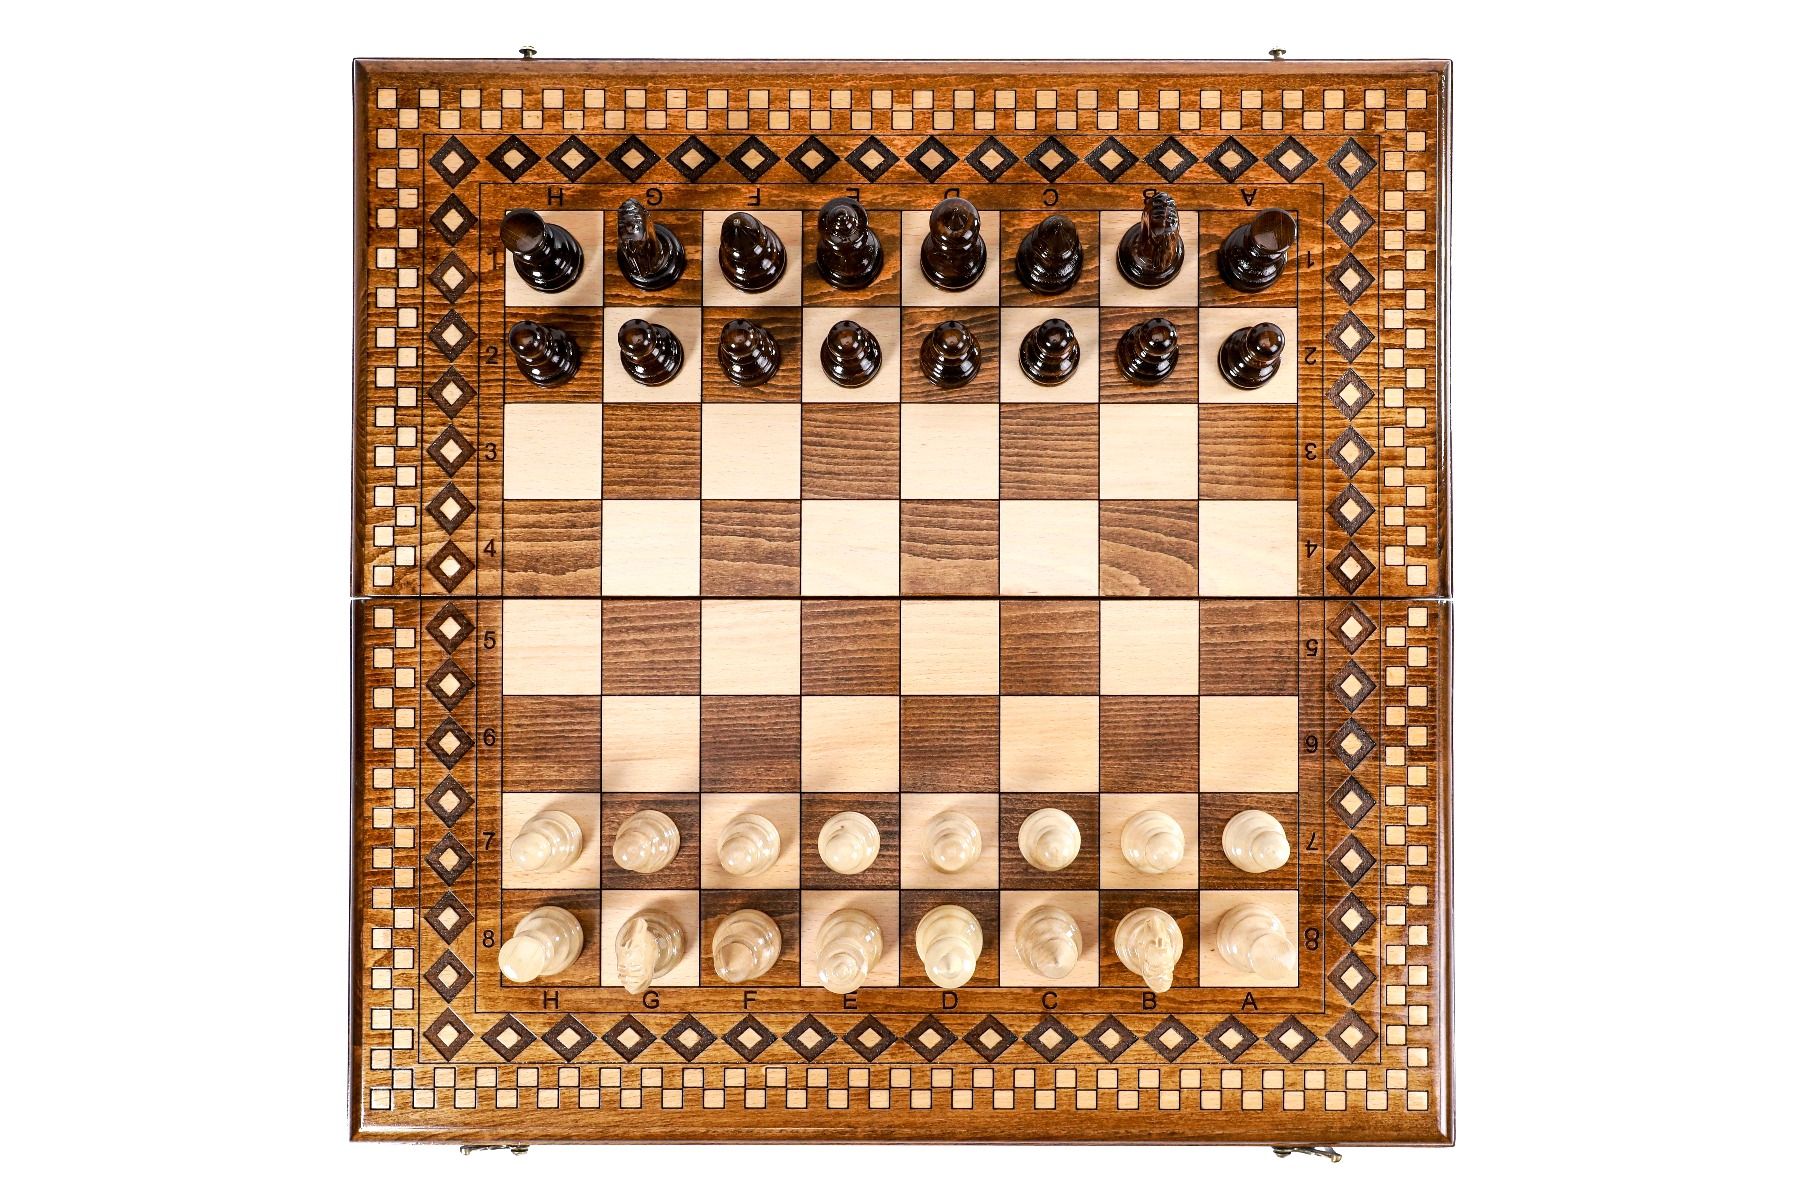 A testament to skilled craftsmanship, this unique chess set invites players to explore the game within a framework of Armenian cultural artistry.